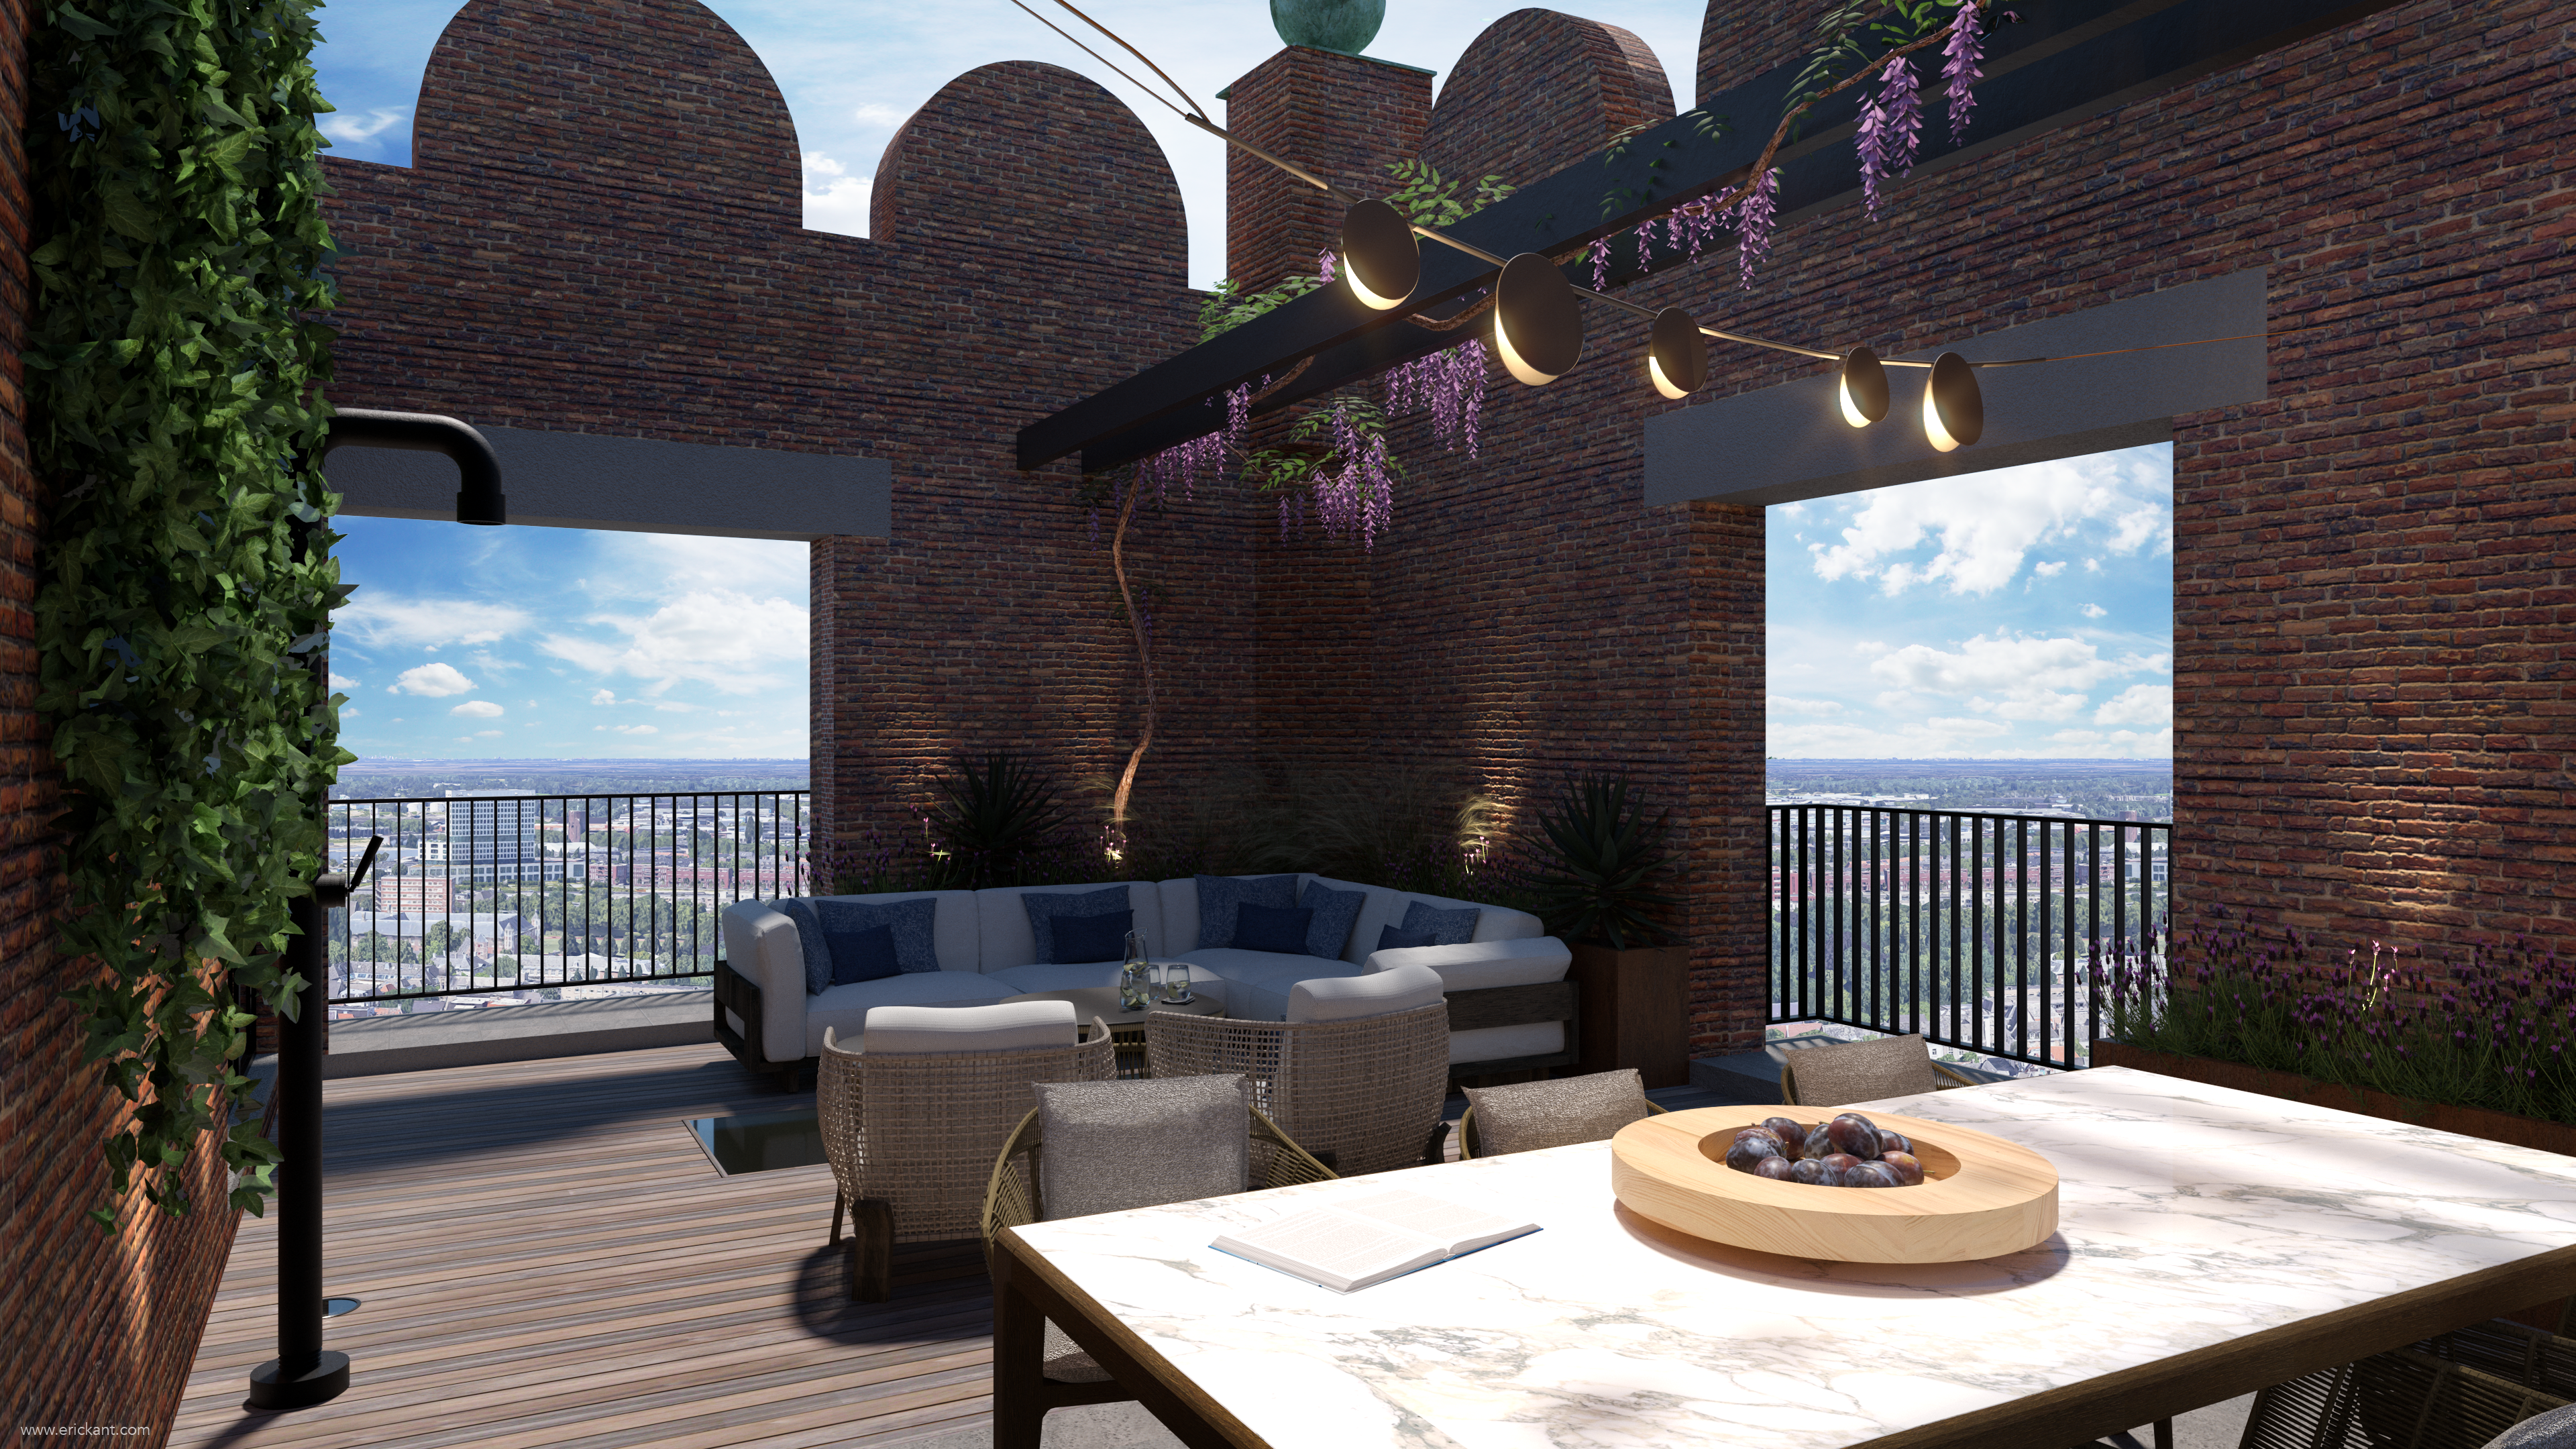 Penthouse-terras-roof-design-eric-kant.png